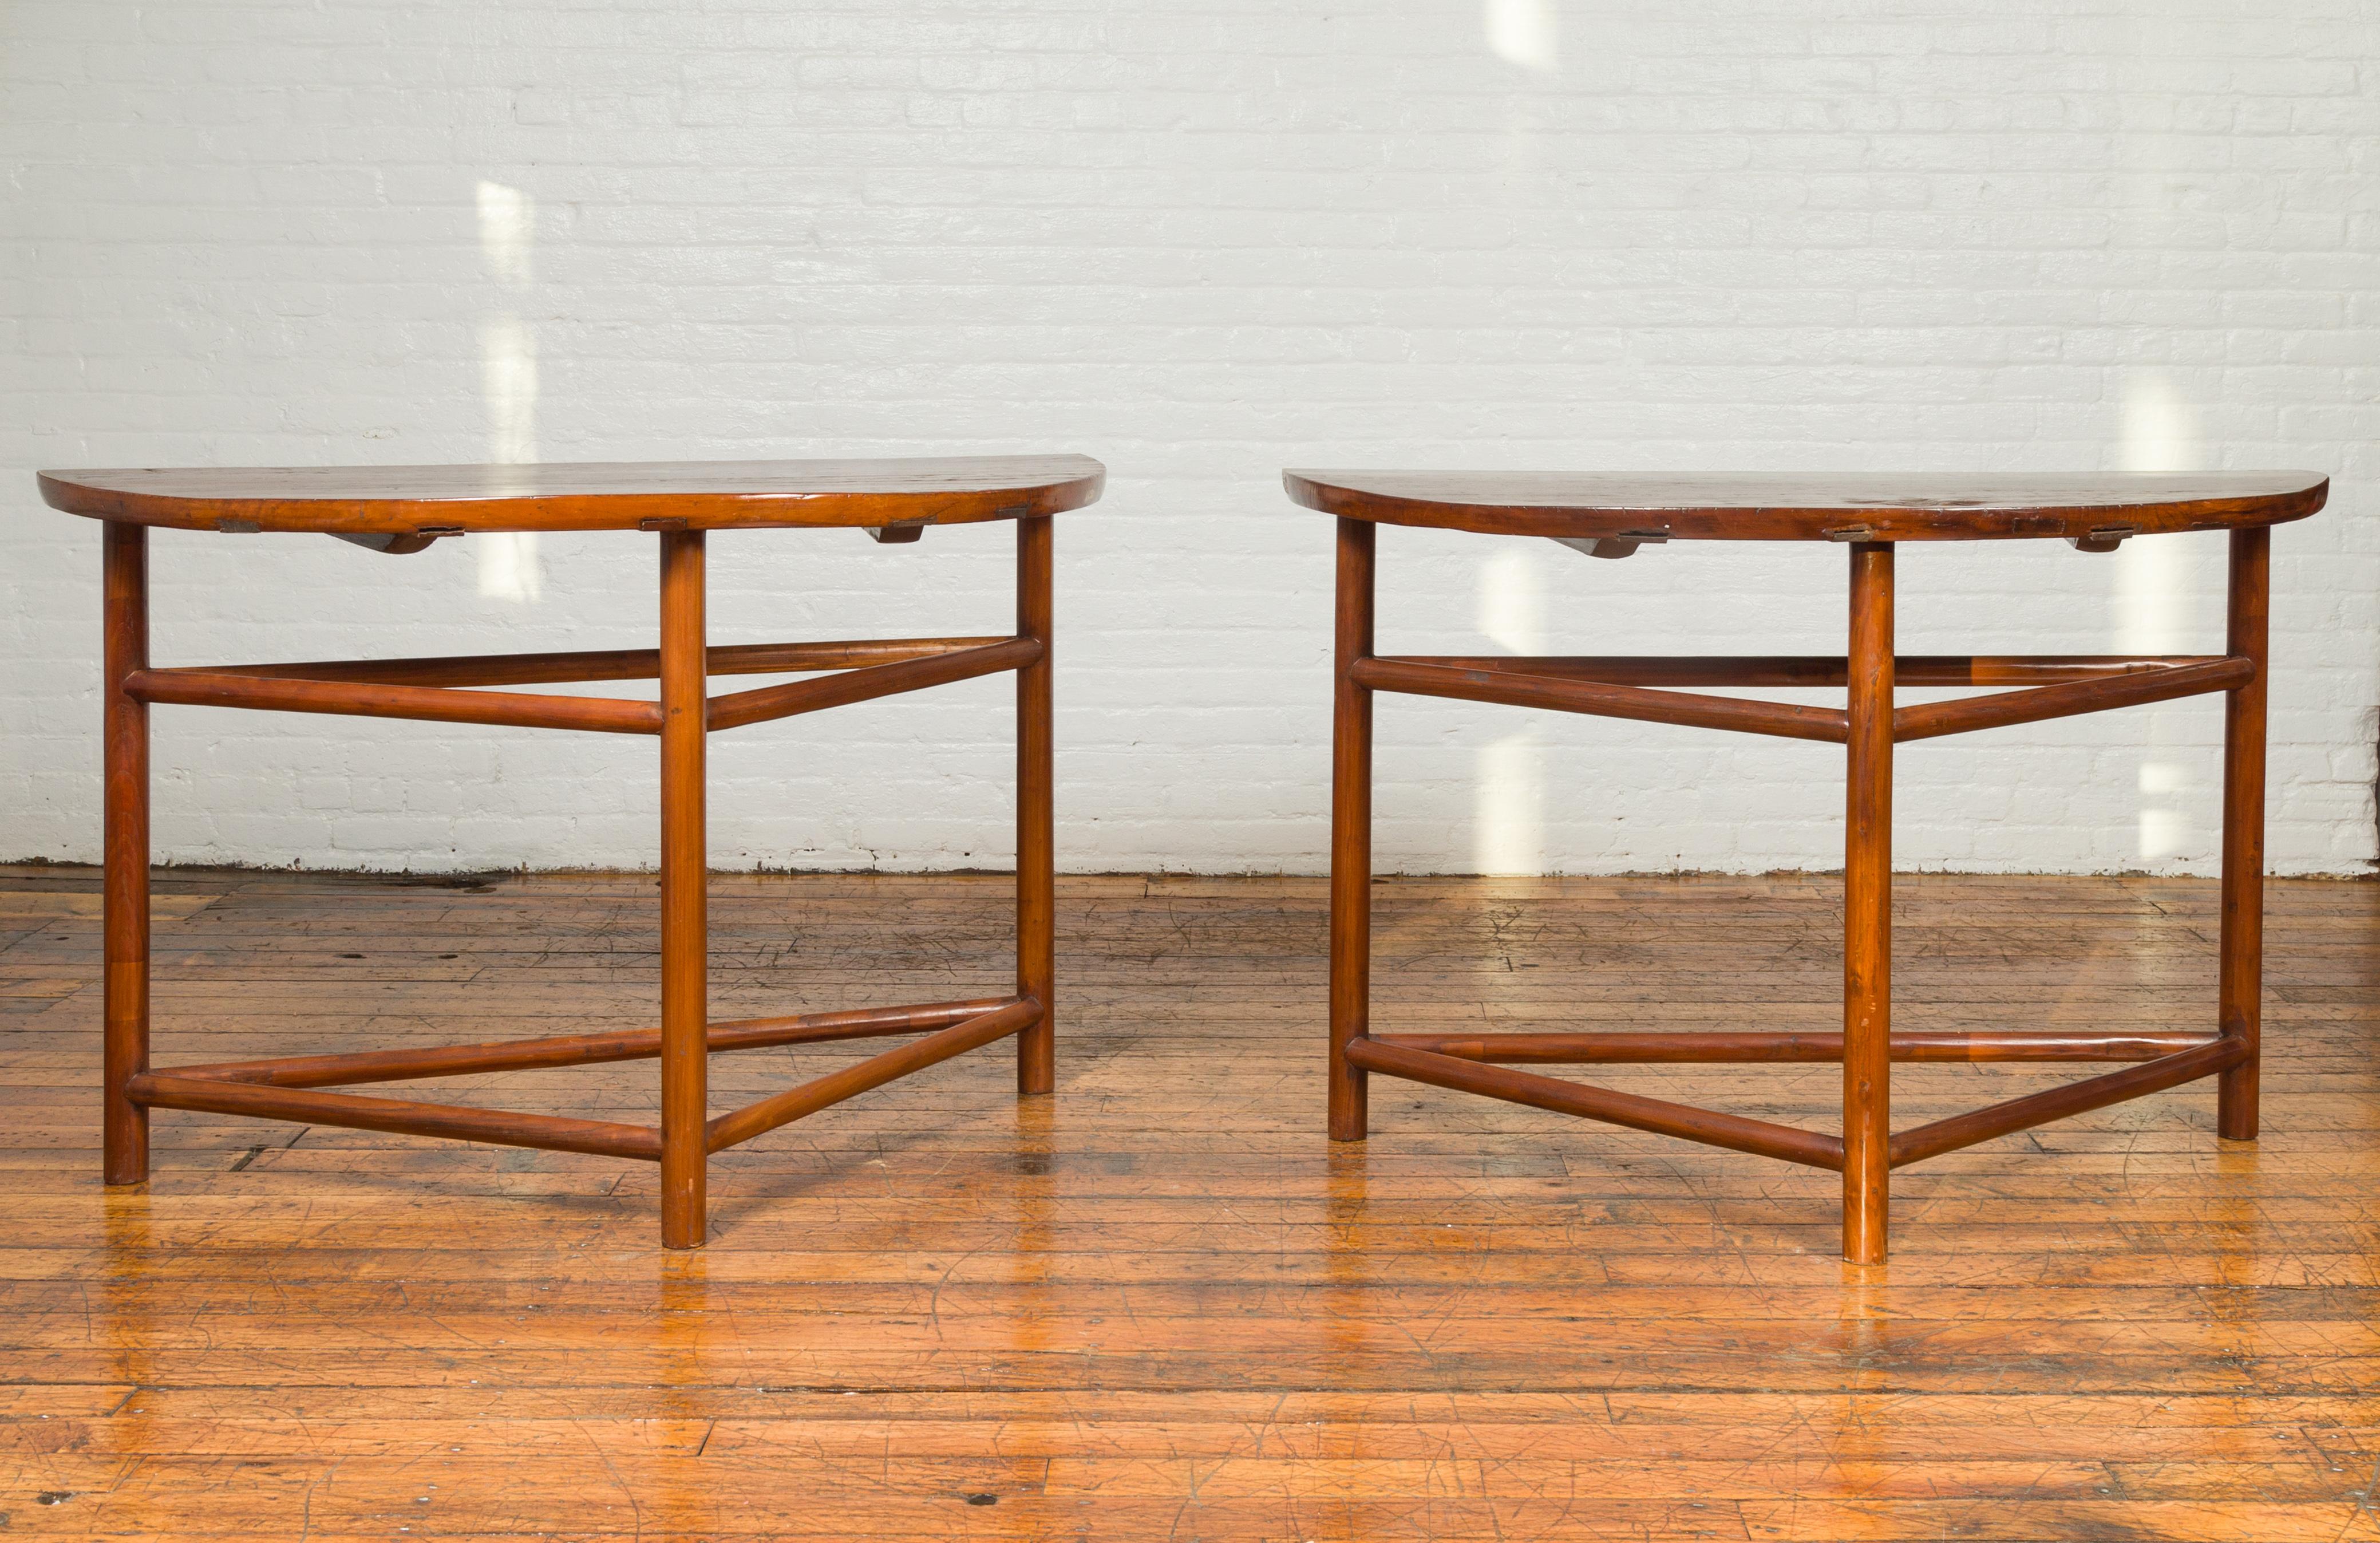 A vintage pair of Chinese demilune console tables from the mid-20th century, with semi-circular top and triangular stretchers. Born in China during the midcentury period, each of this pair of demilune tables features a semi-circular top sitting